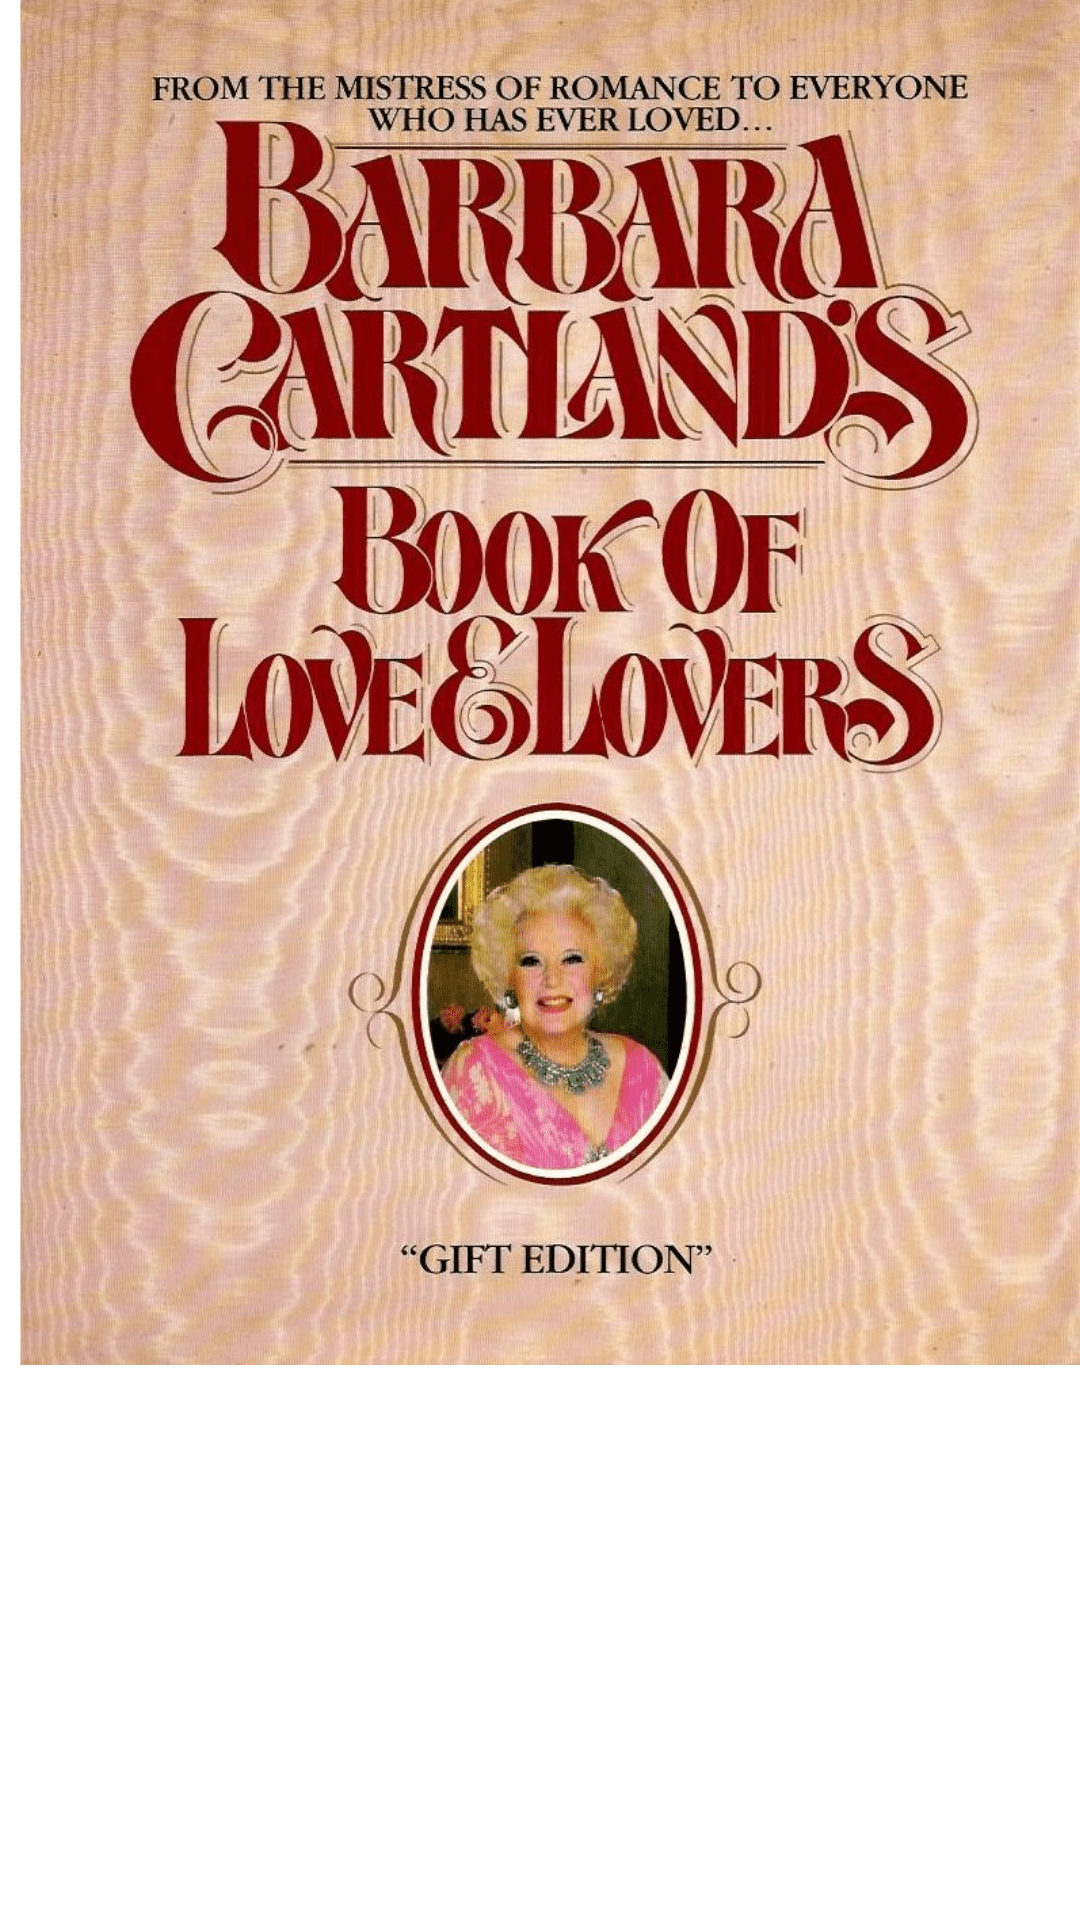 Book of Love and Lovers by Barbara Cartland